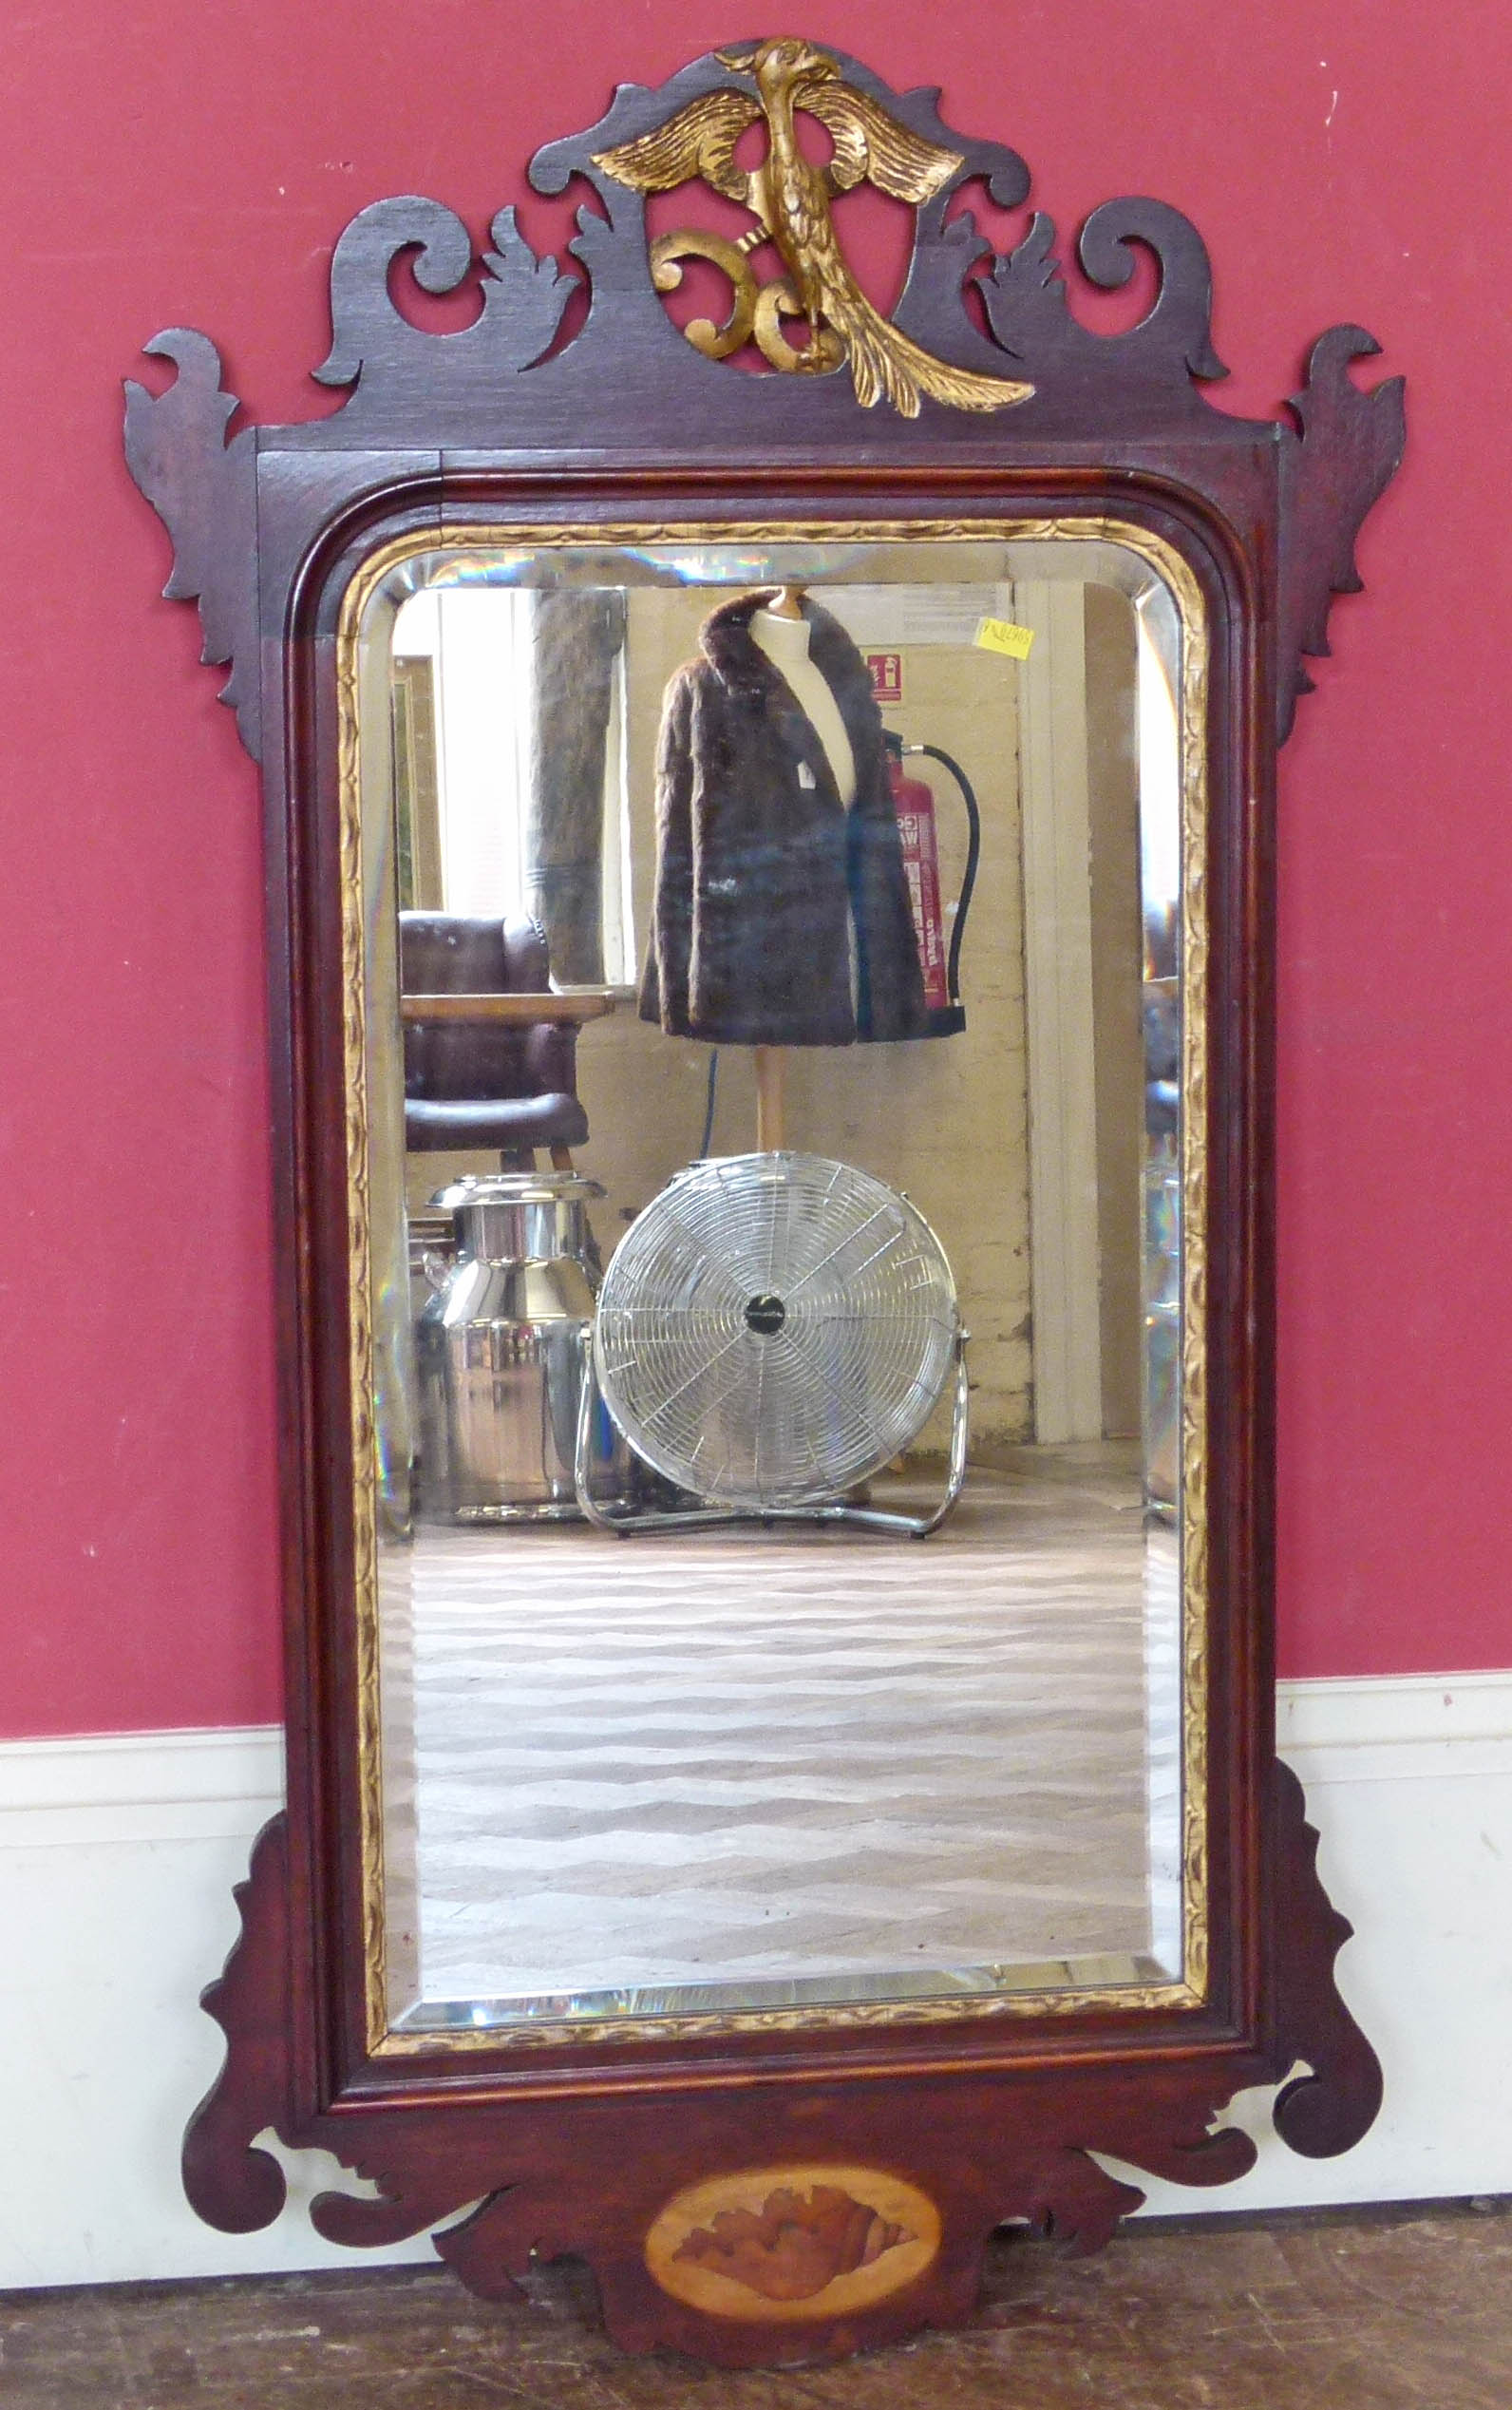 Late 19th century mahogany framed wall mirror pediment with ho ho bird. Condition reports are not